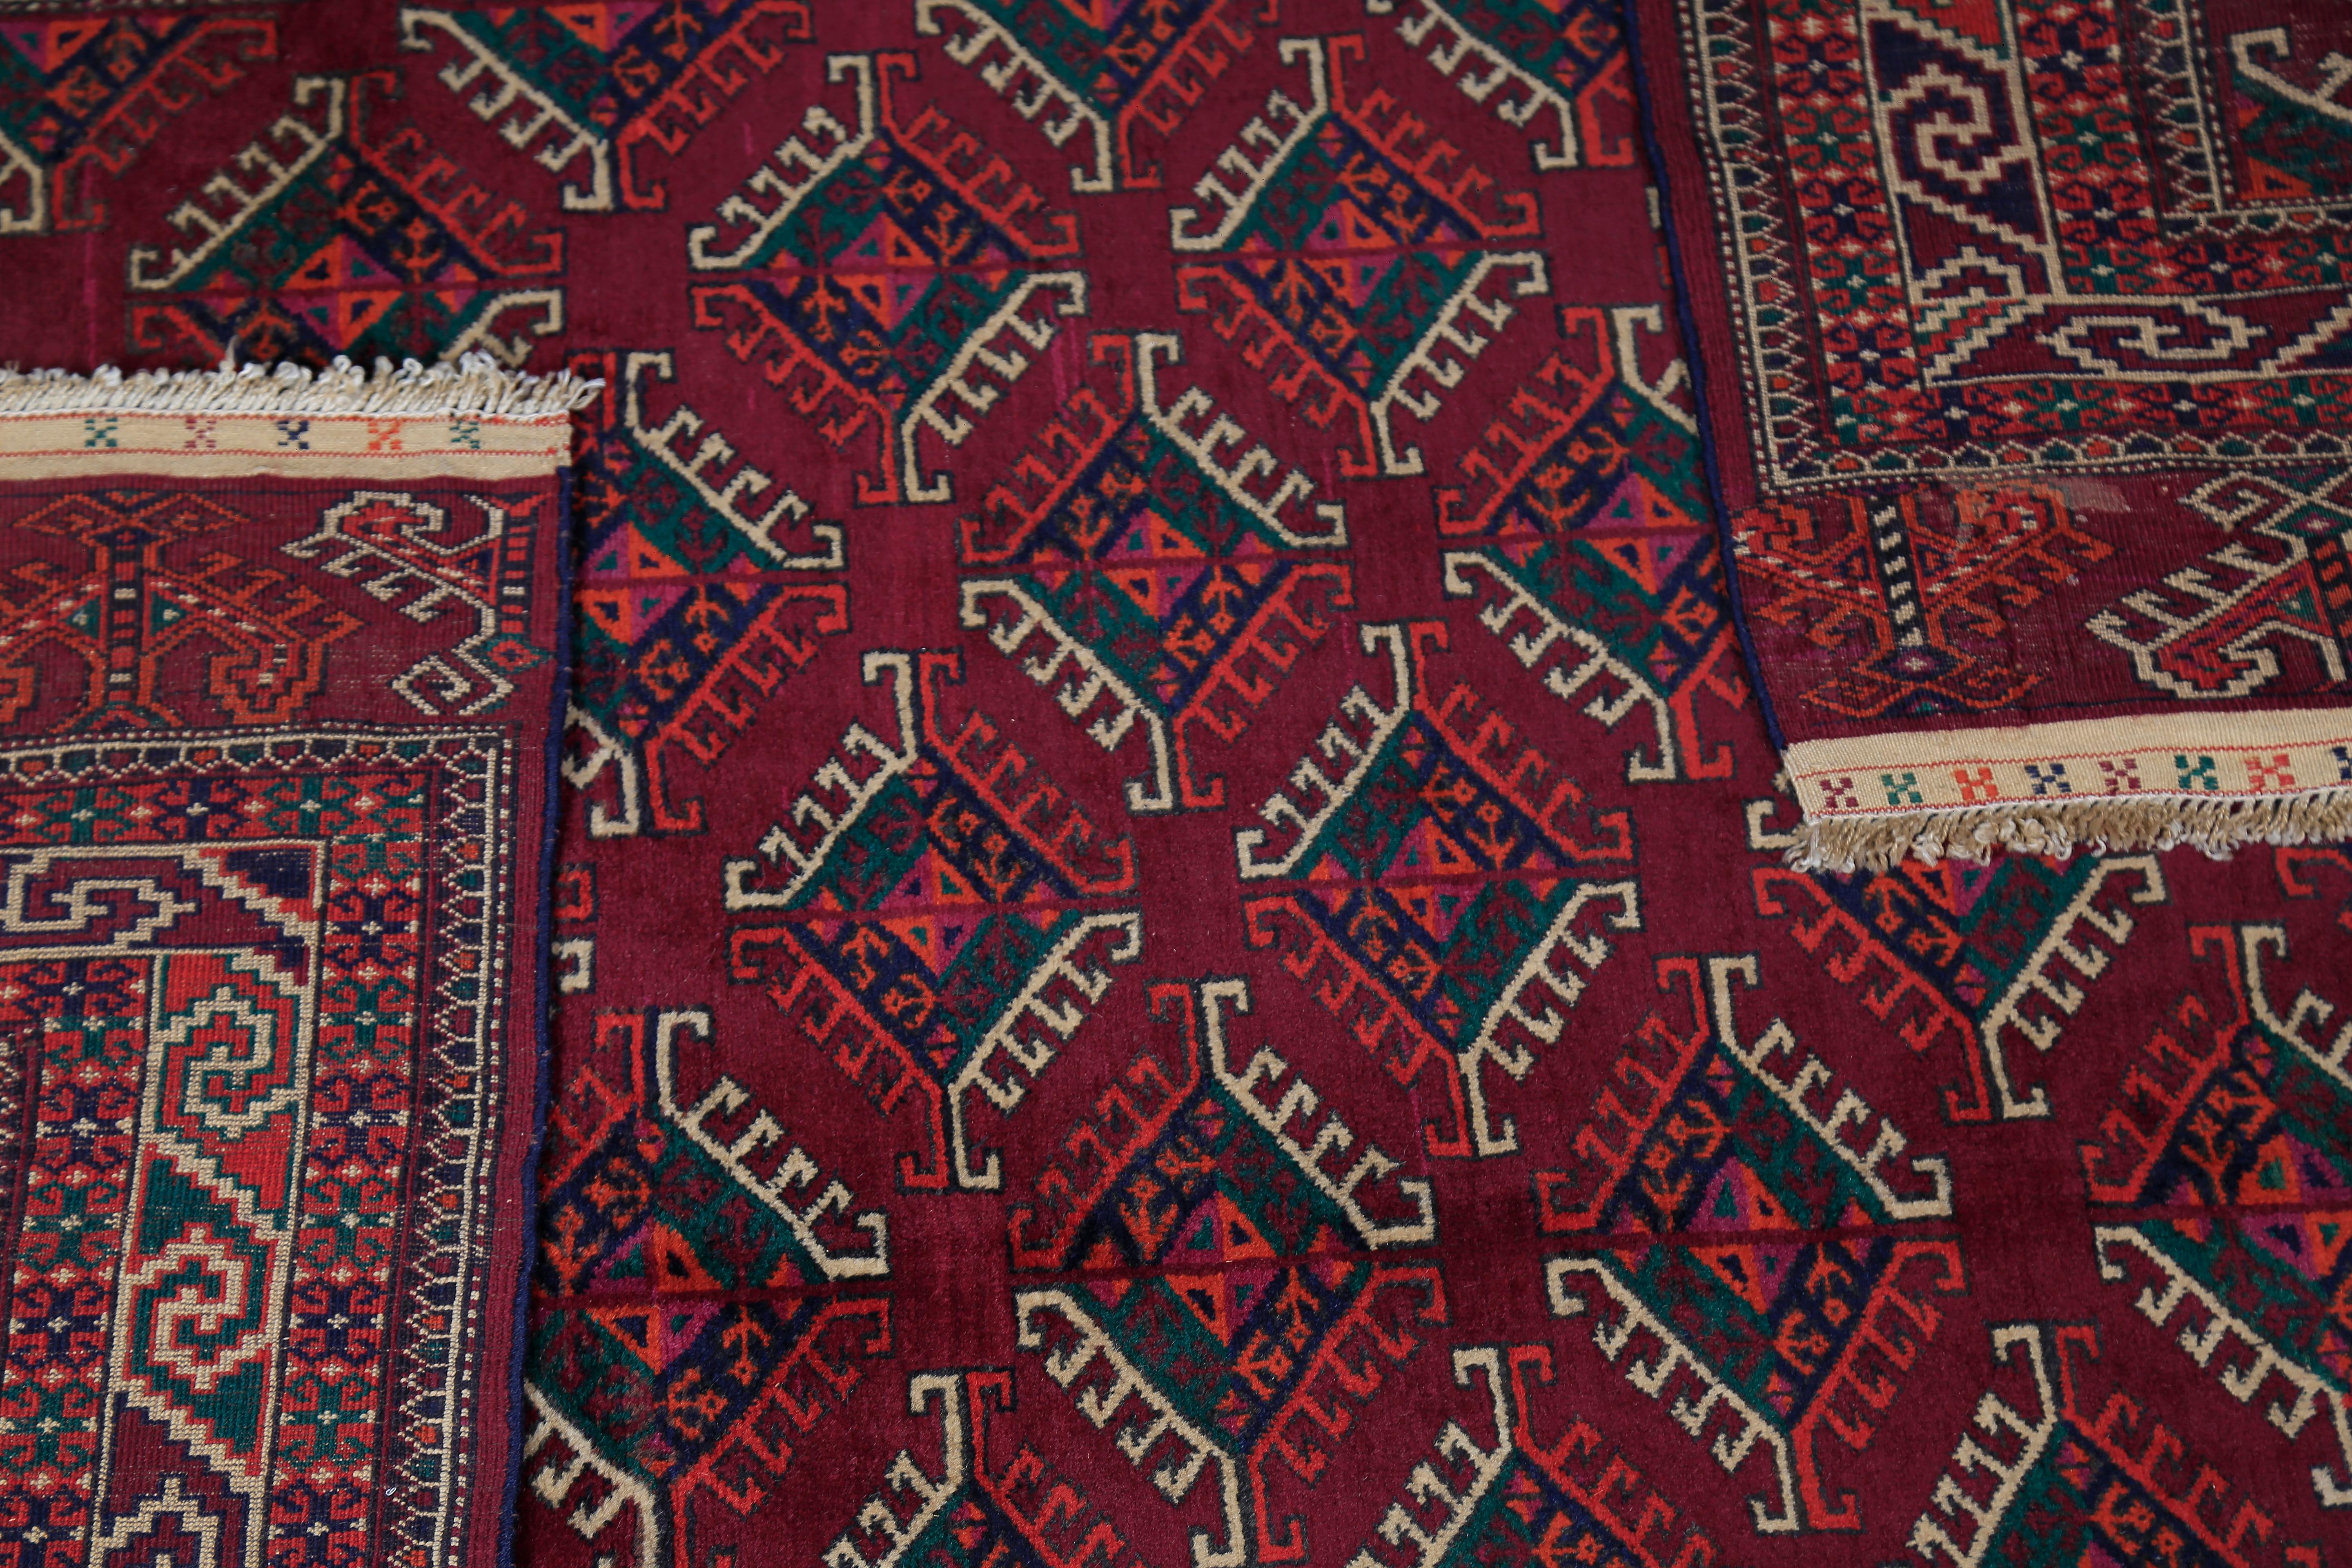 Woven in Golestan province , far north Iran adjoining Turkmenistan, by a female weaver, circa 1950. Members of the semi-nomadic Yomud tribe have resided here for centuries. This is a very high quality example of tribal weaving from this era. The